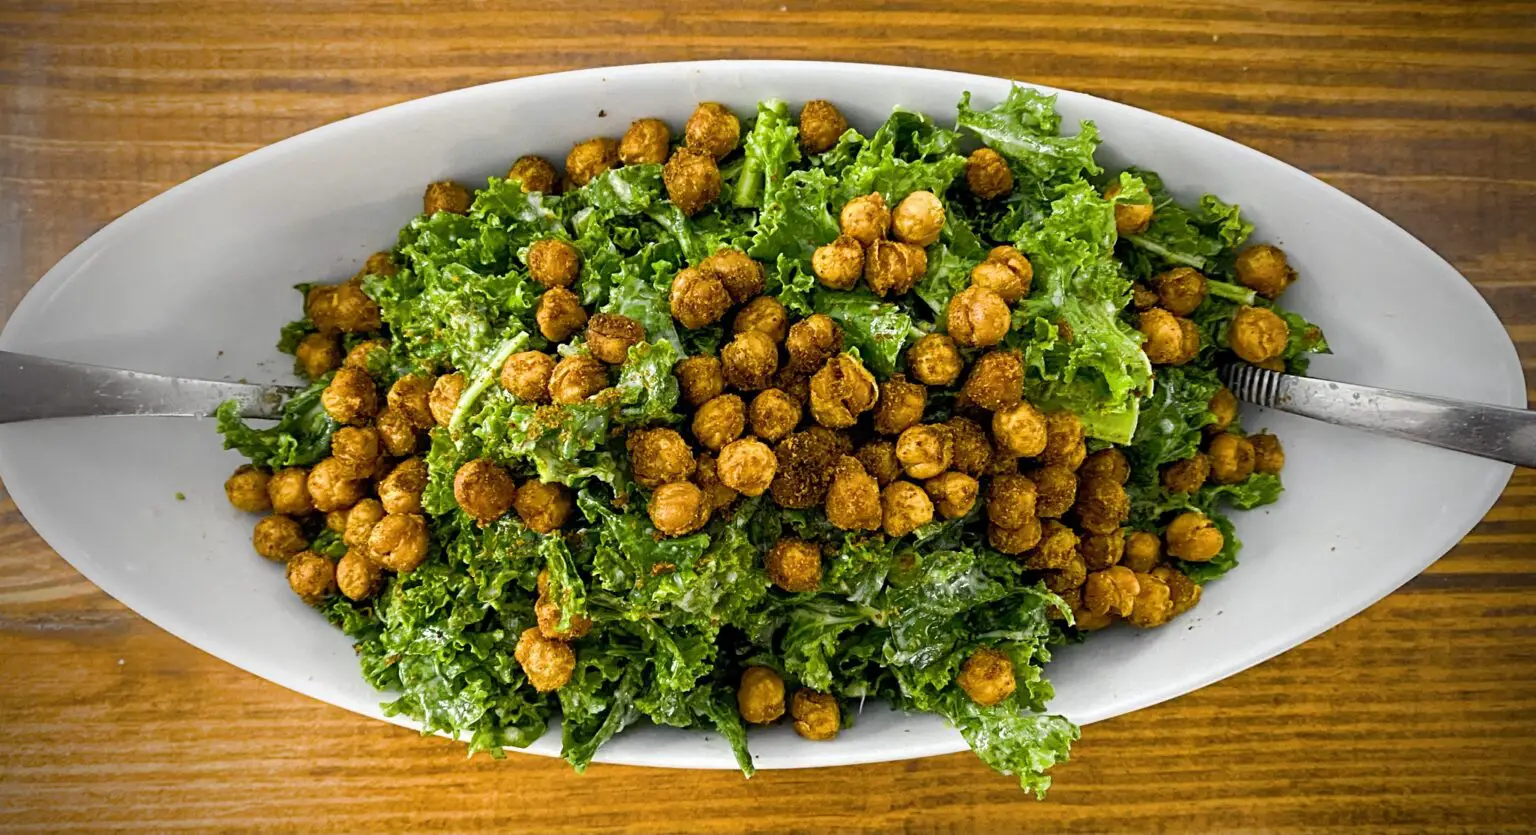 Overhead view of an oval-shaped plate filled with kale salad and spicy chickpeas.